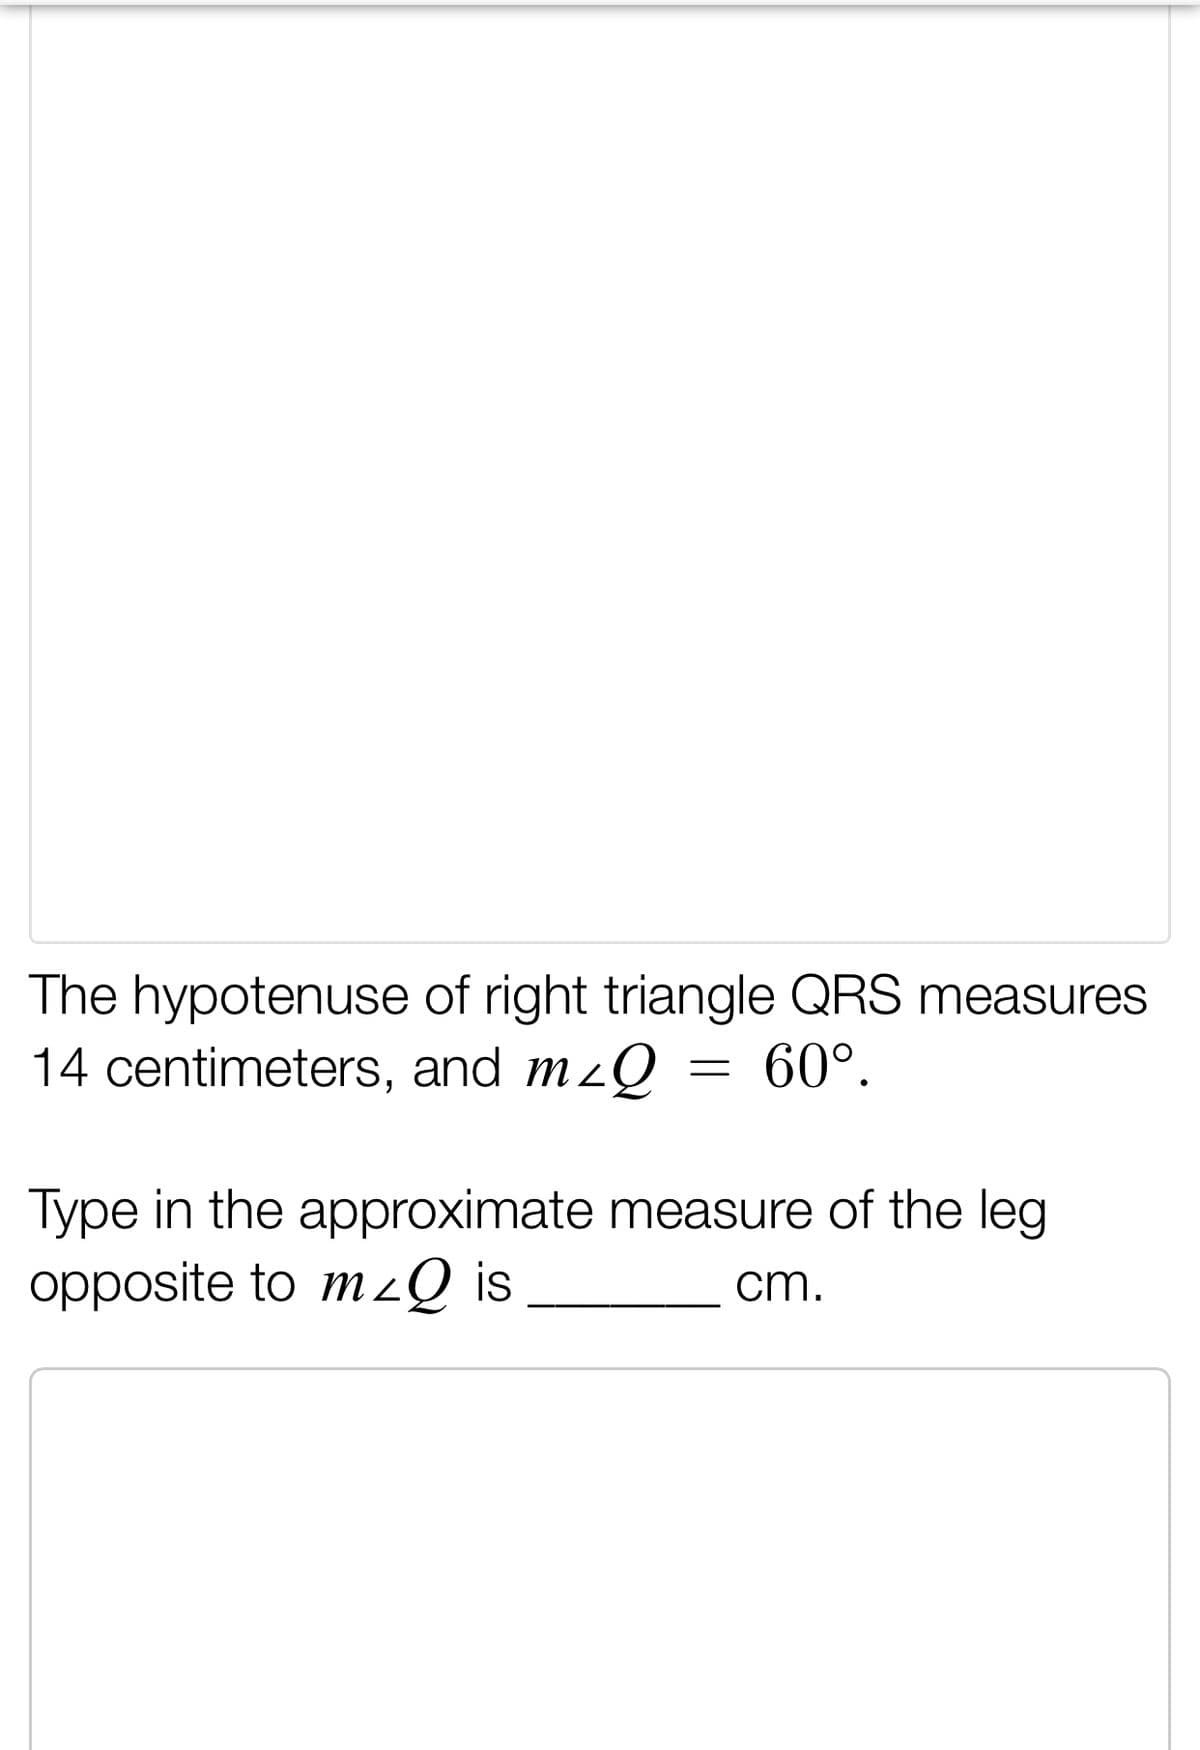 The hypotenuse of right triangle QRS measures
14 centimeters, and mzQ = 60°.
Type in the approximate measure of the leg
opposite to mzQ is
cm.
